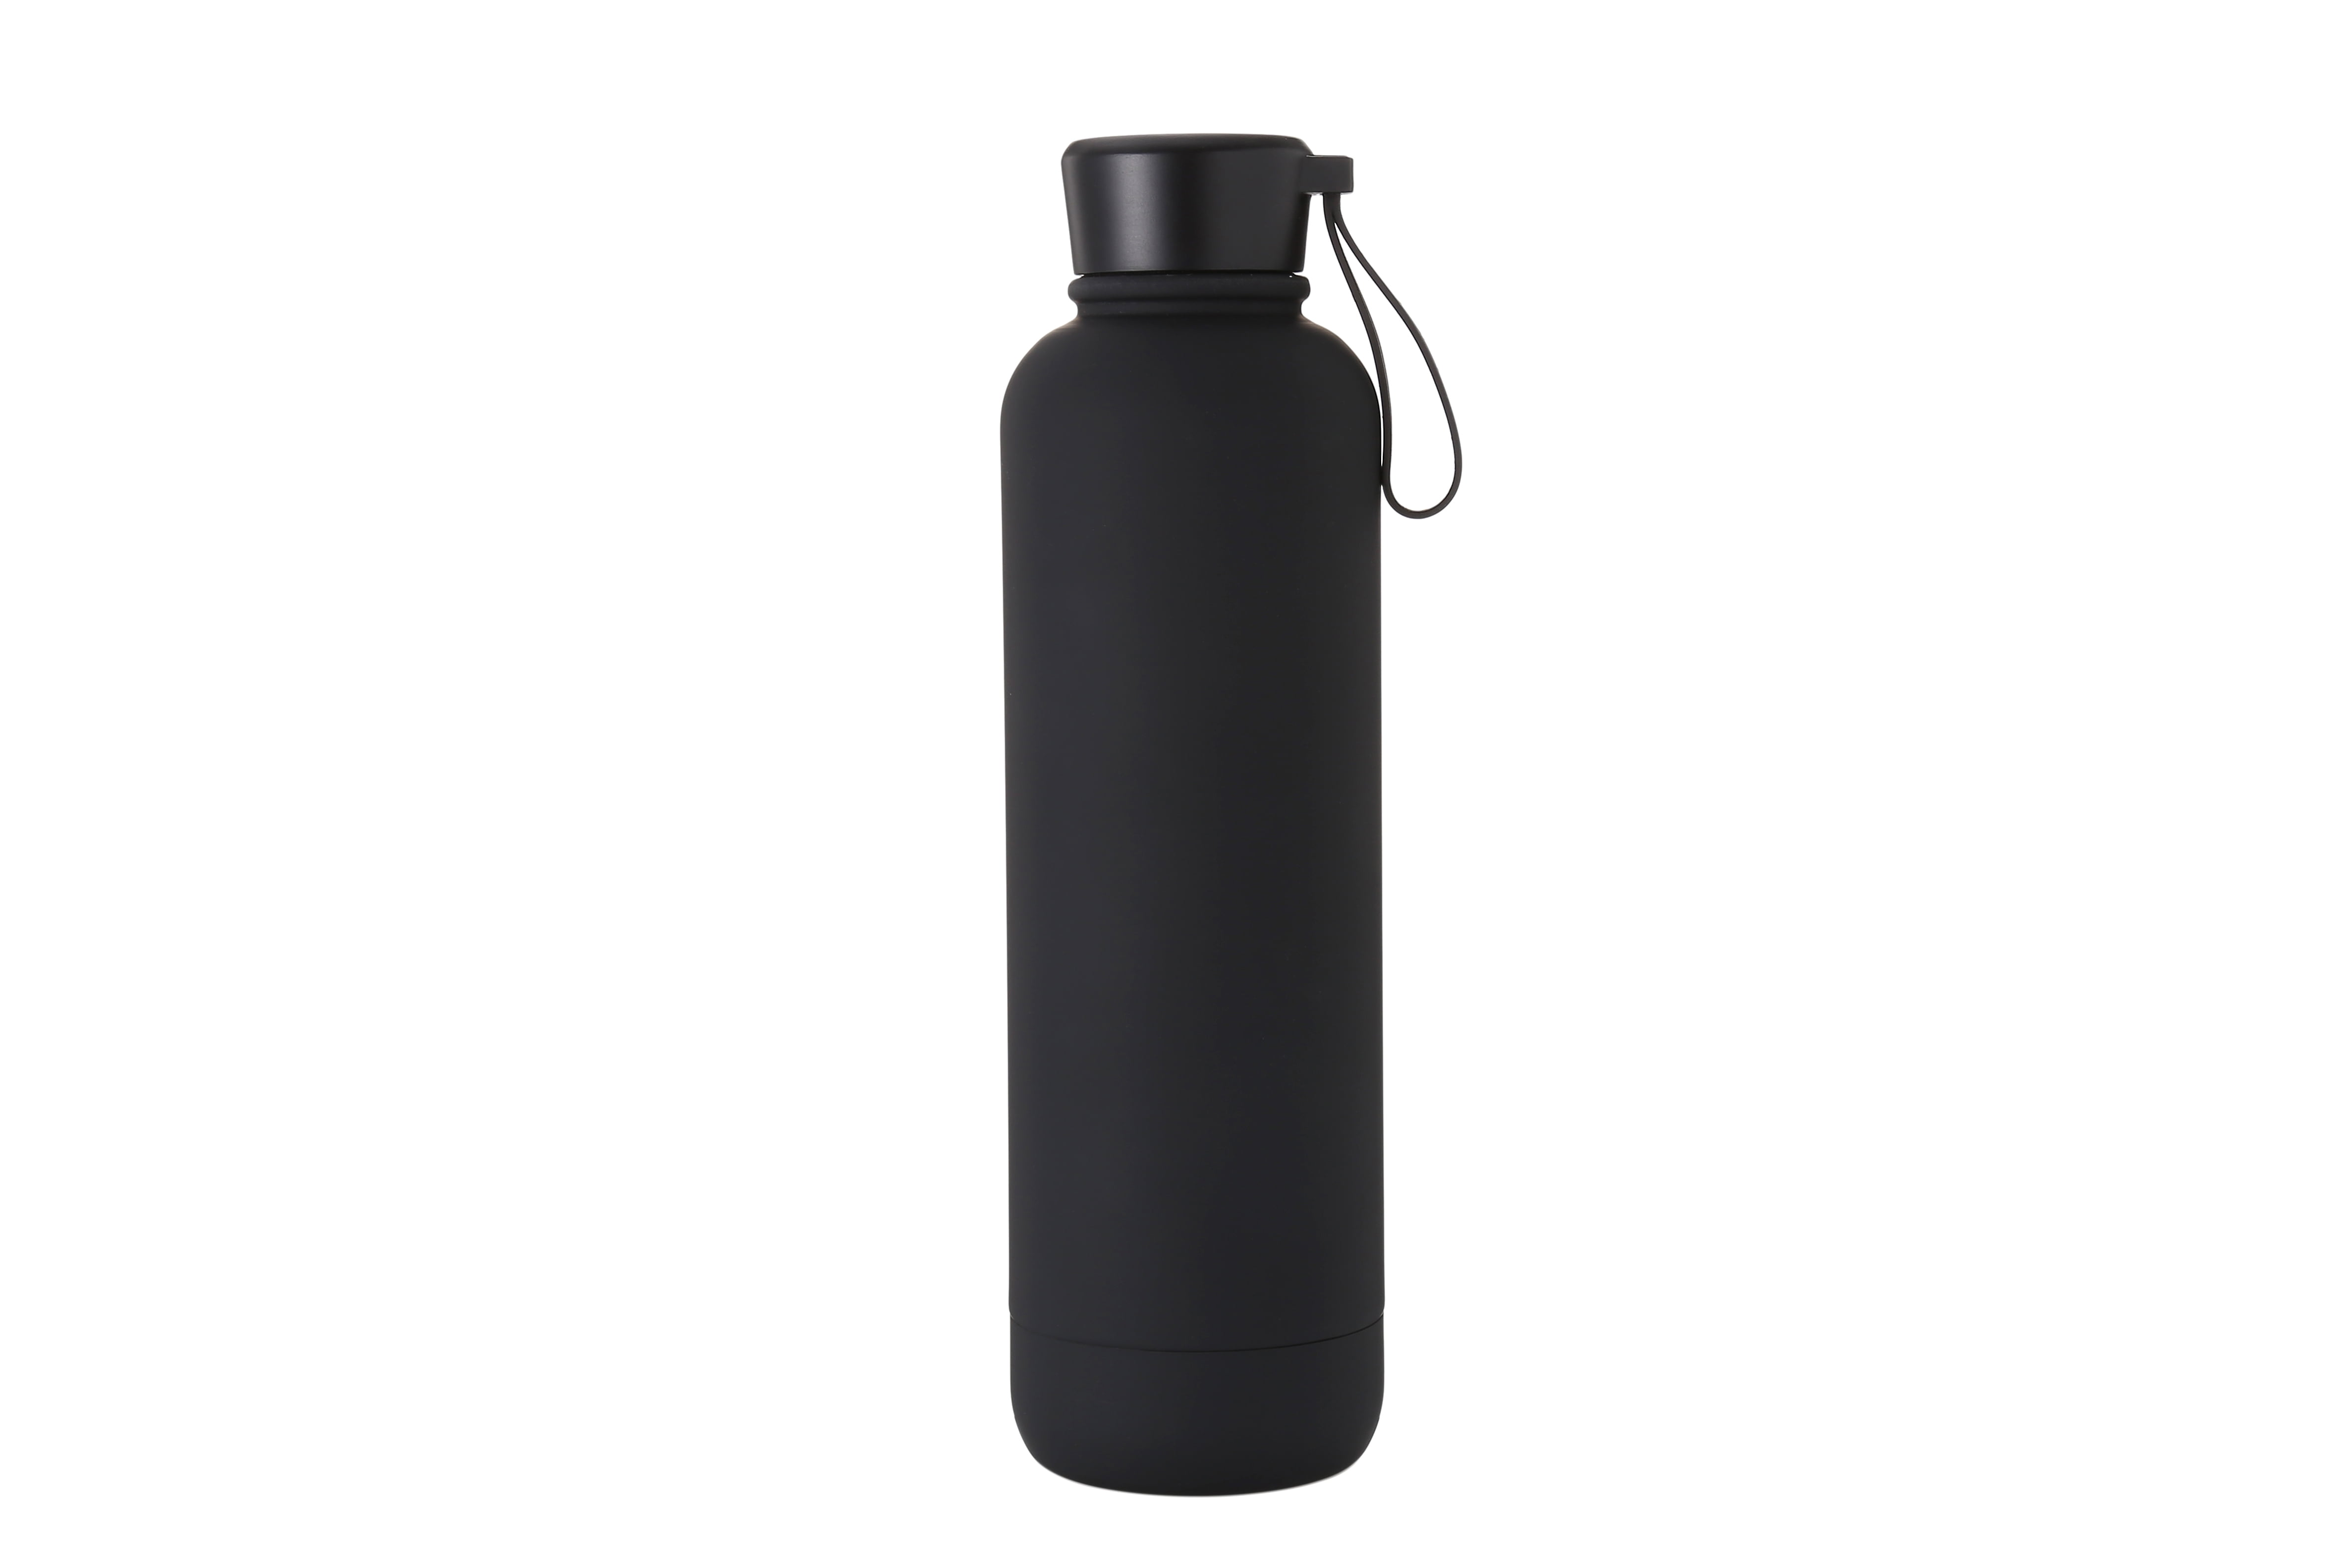 Perka® Altair Double Wall, Stainless Steel Water Bottle 17 oz.